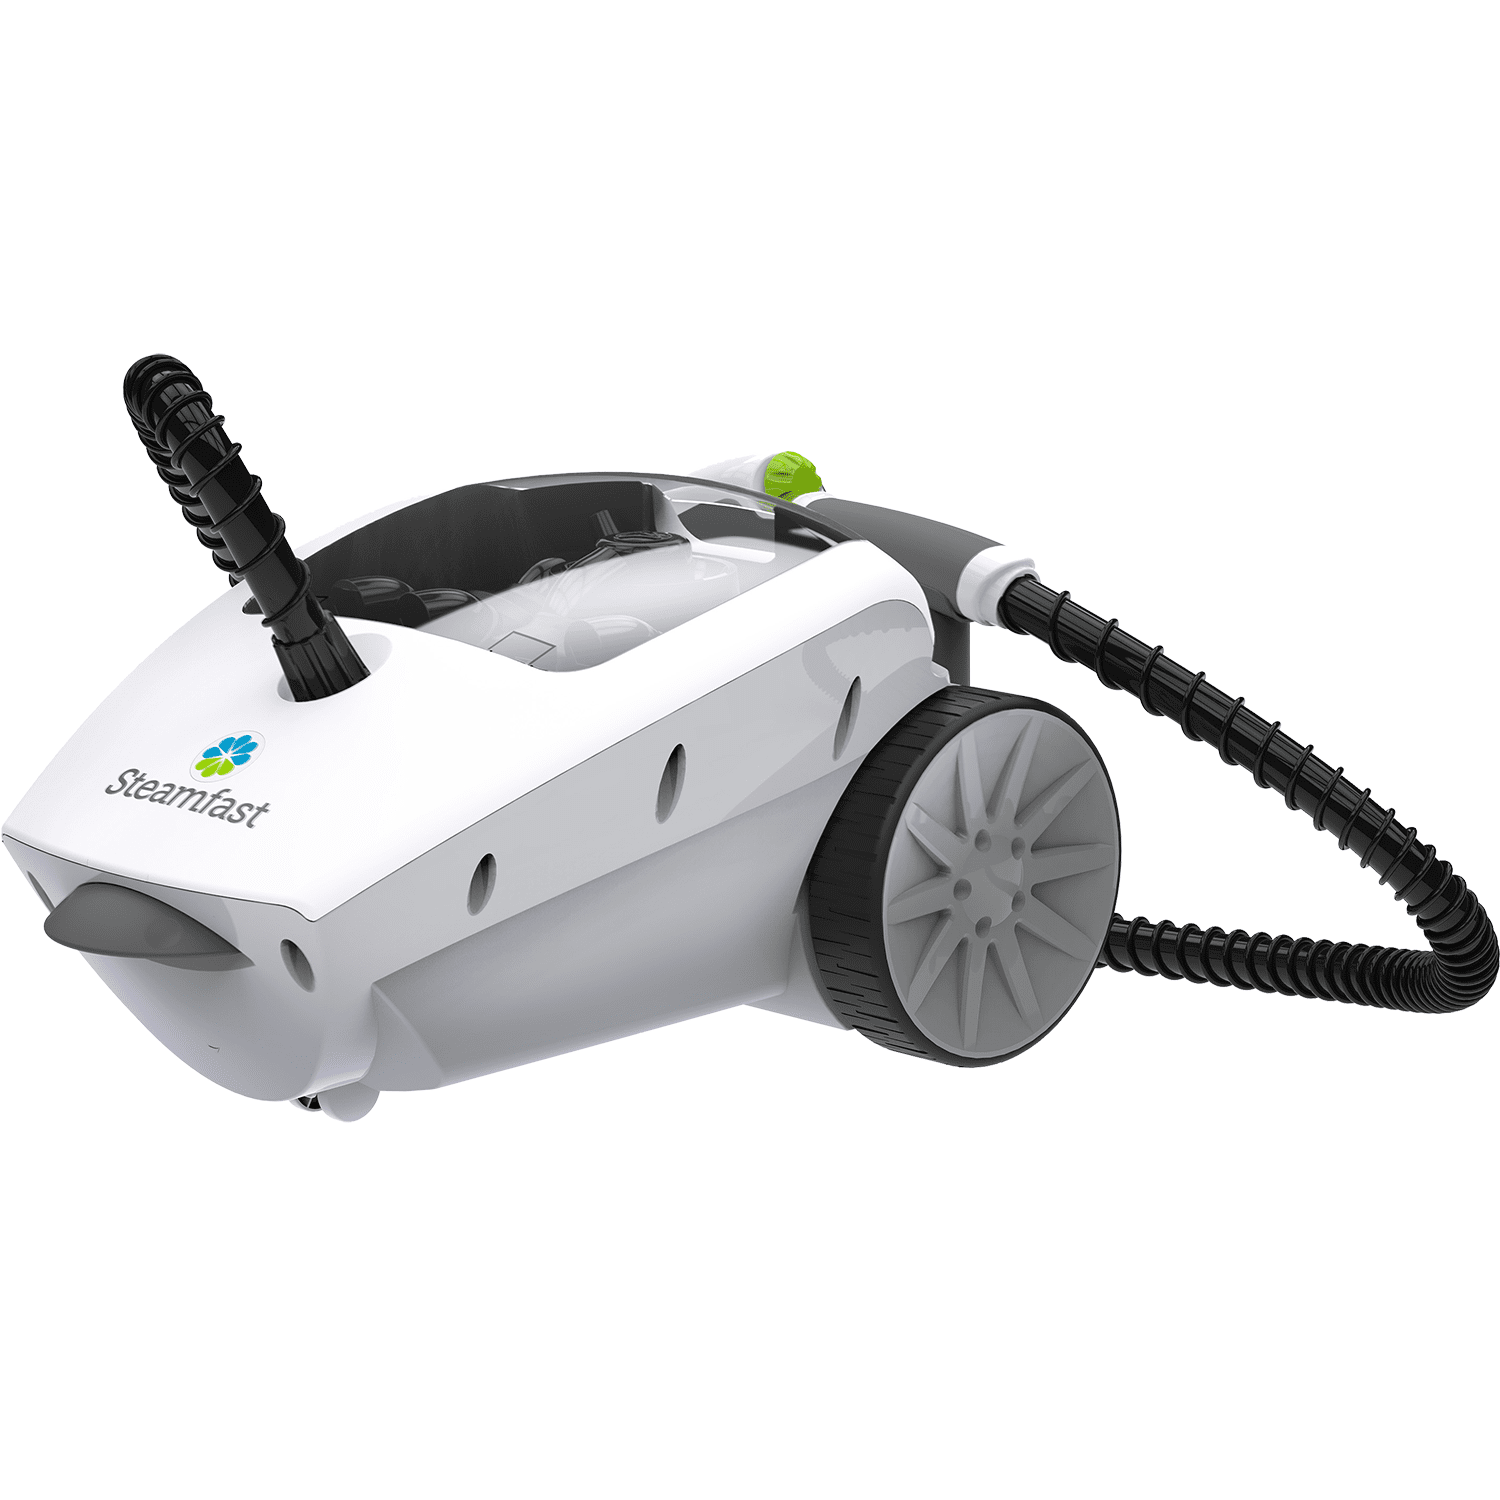 Steamfast Deluxe Canister Steam Cleaner (sf-375)